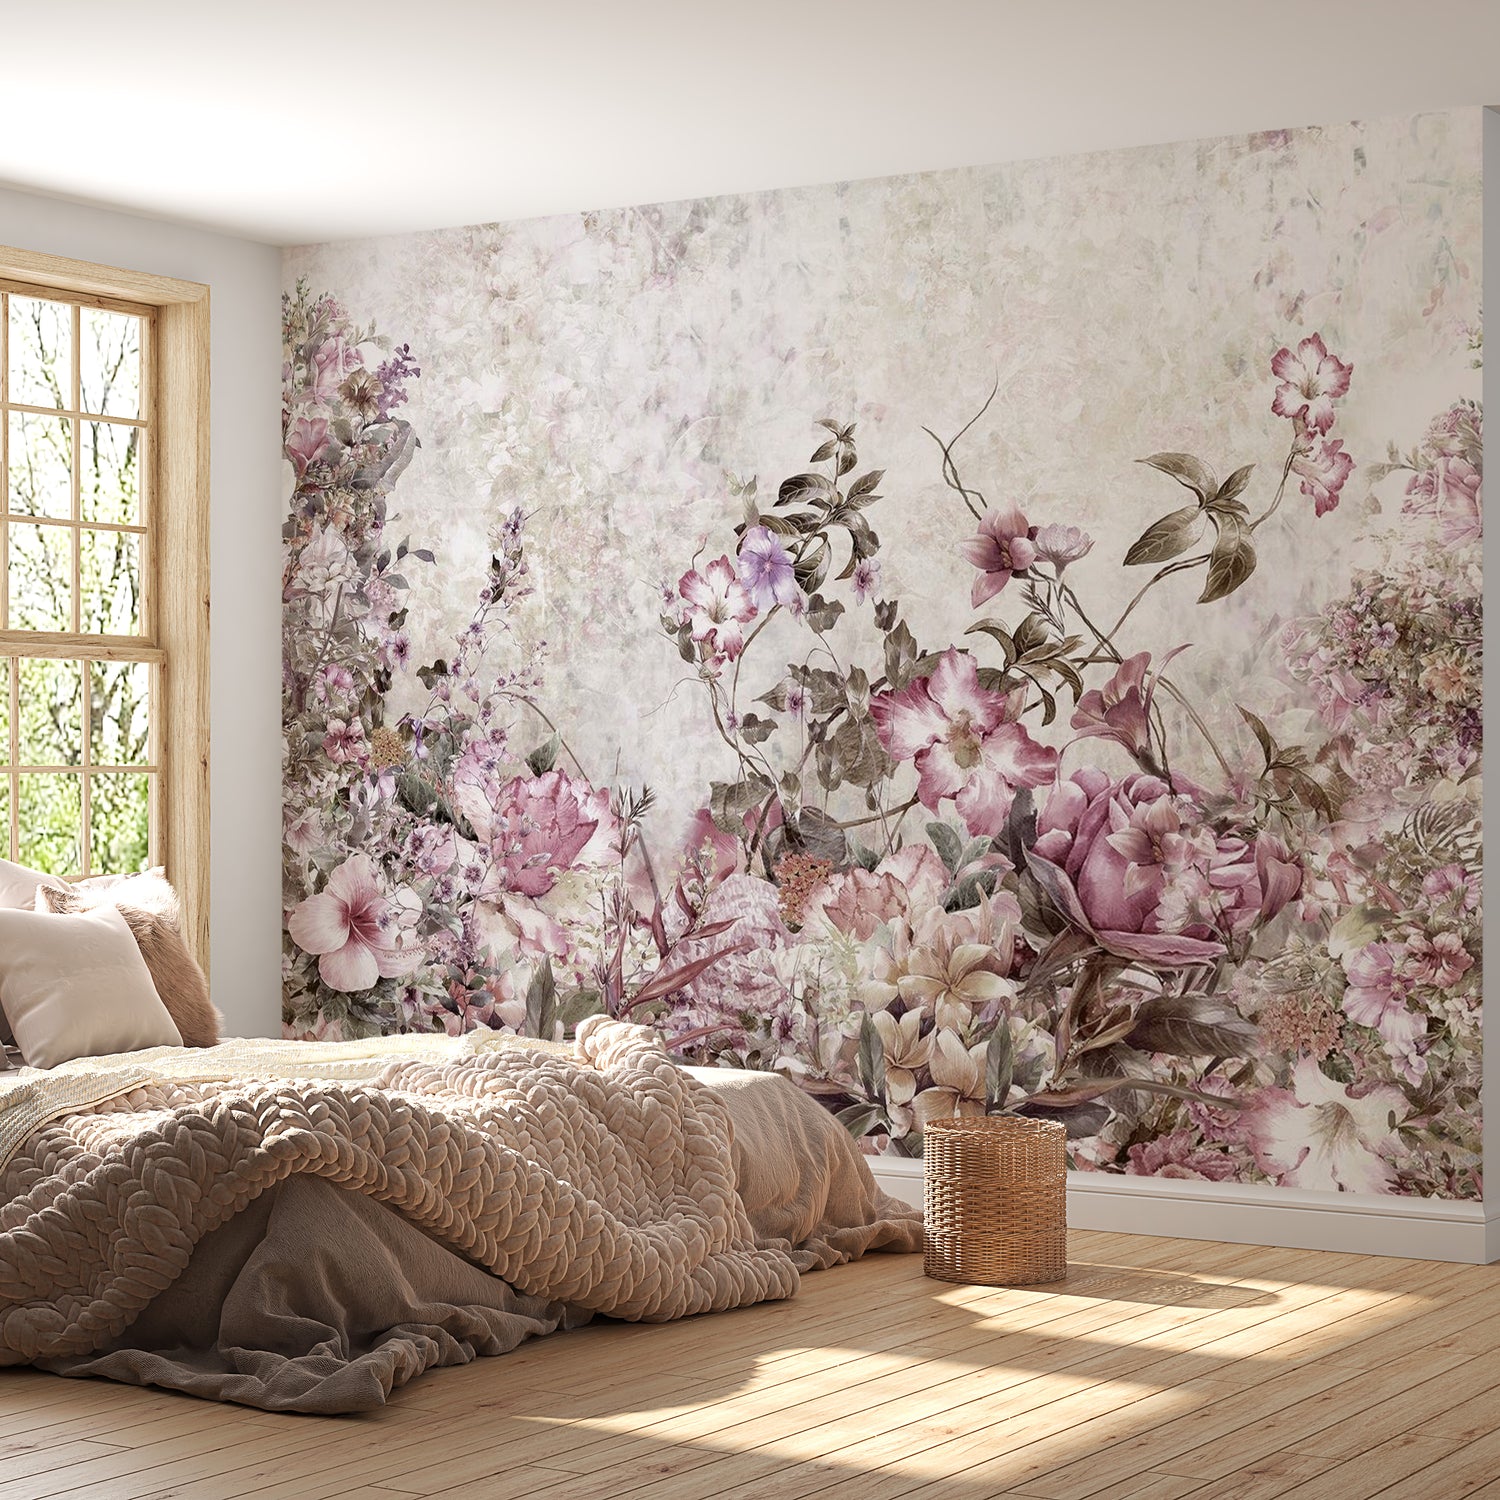 Peel & Stick Floral Wall Mural - Floral Meadow - Removable Wall Decals